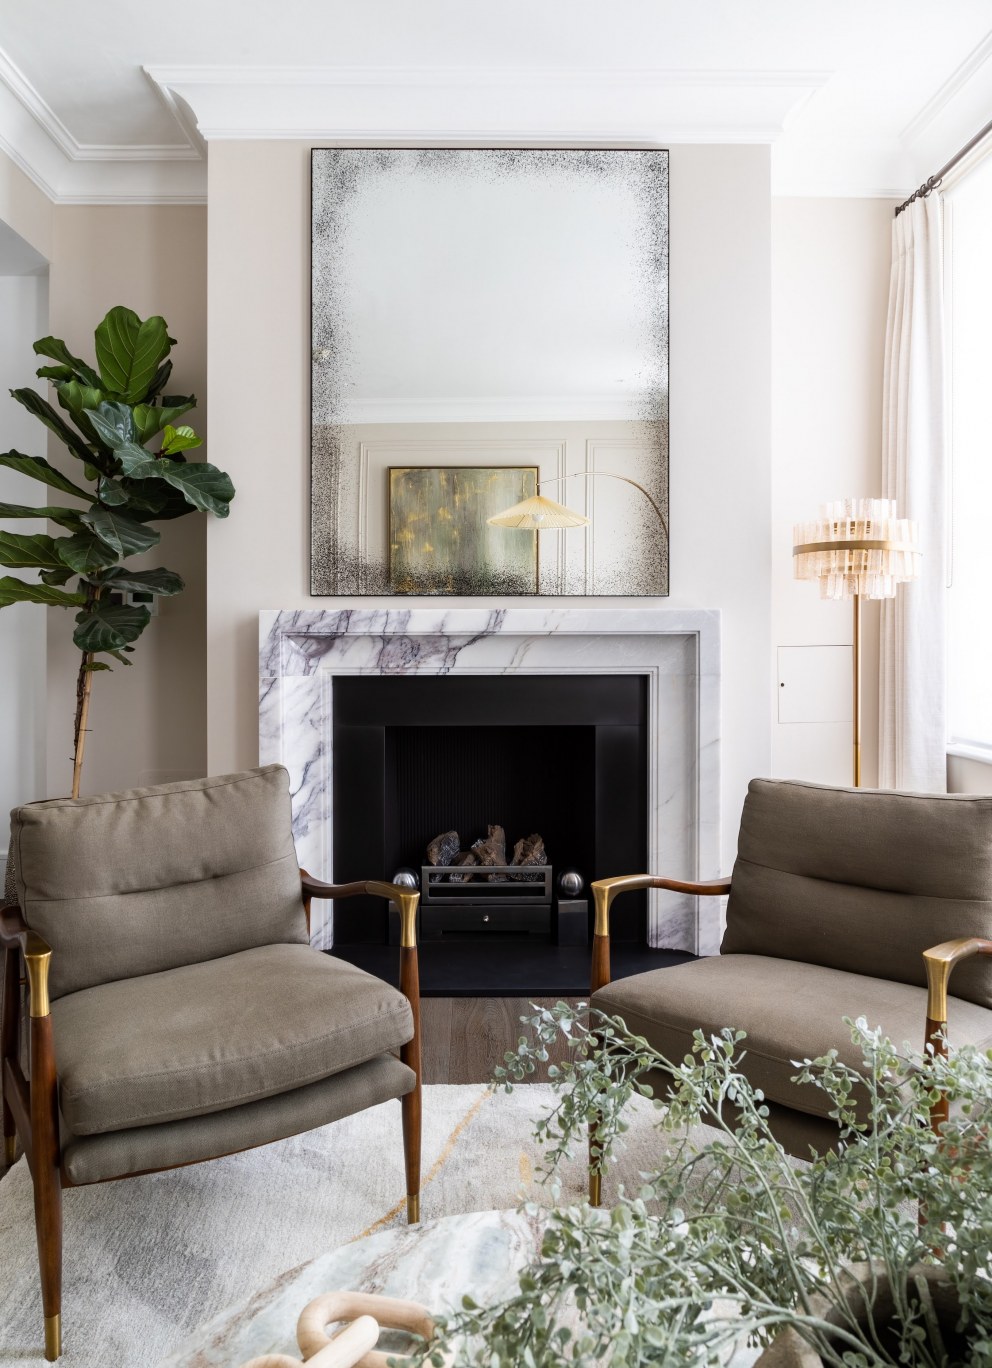 Kings Road Townhouse | living room  | Interior Designers